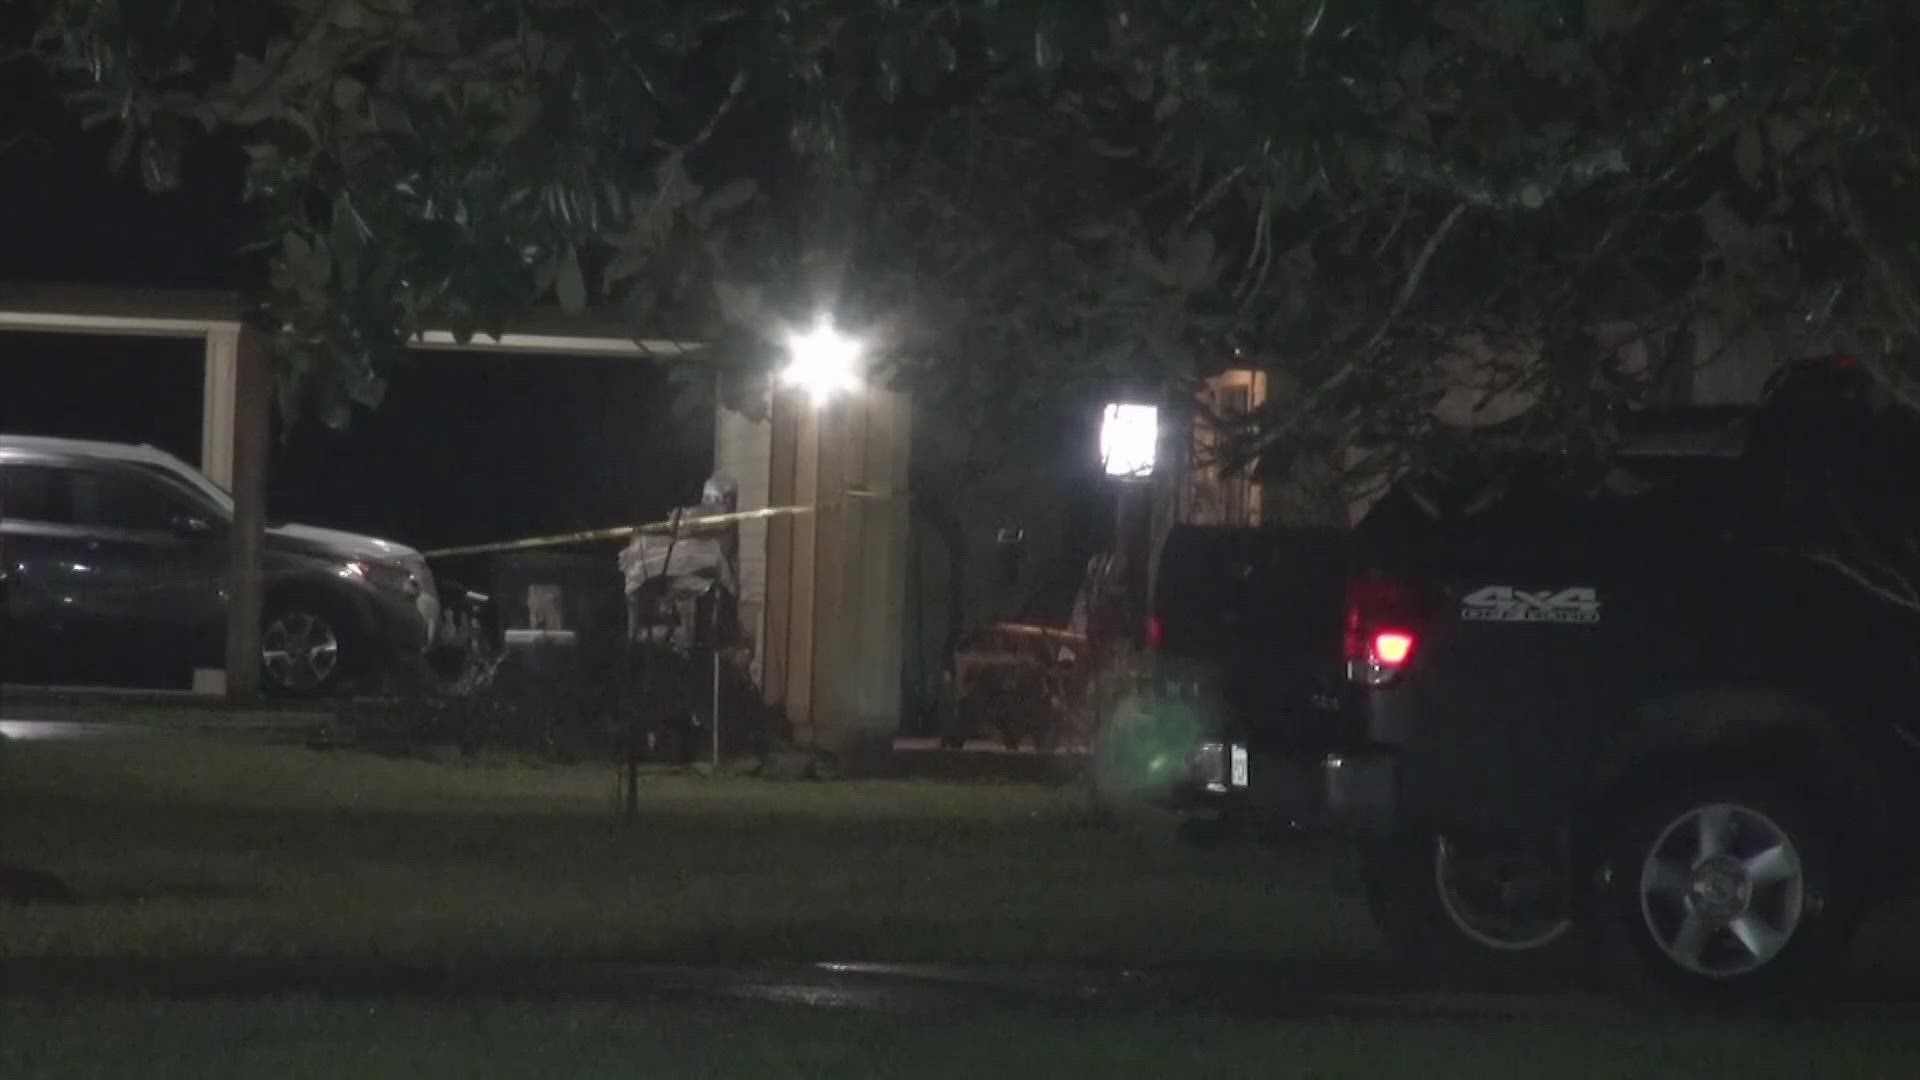 A man was shot by deputies in a neighborhood near Magnolia early Thursday, according to the Montgomery County Sheriff’s Office.